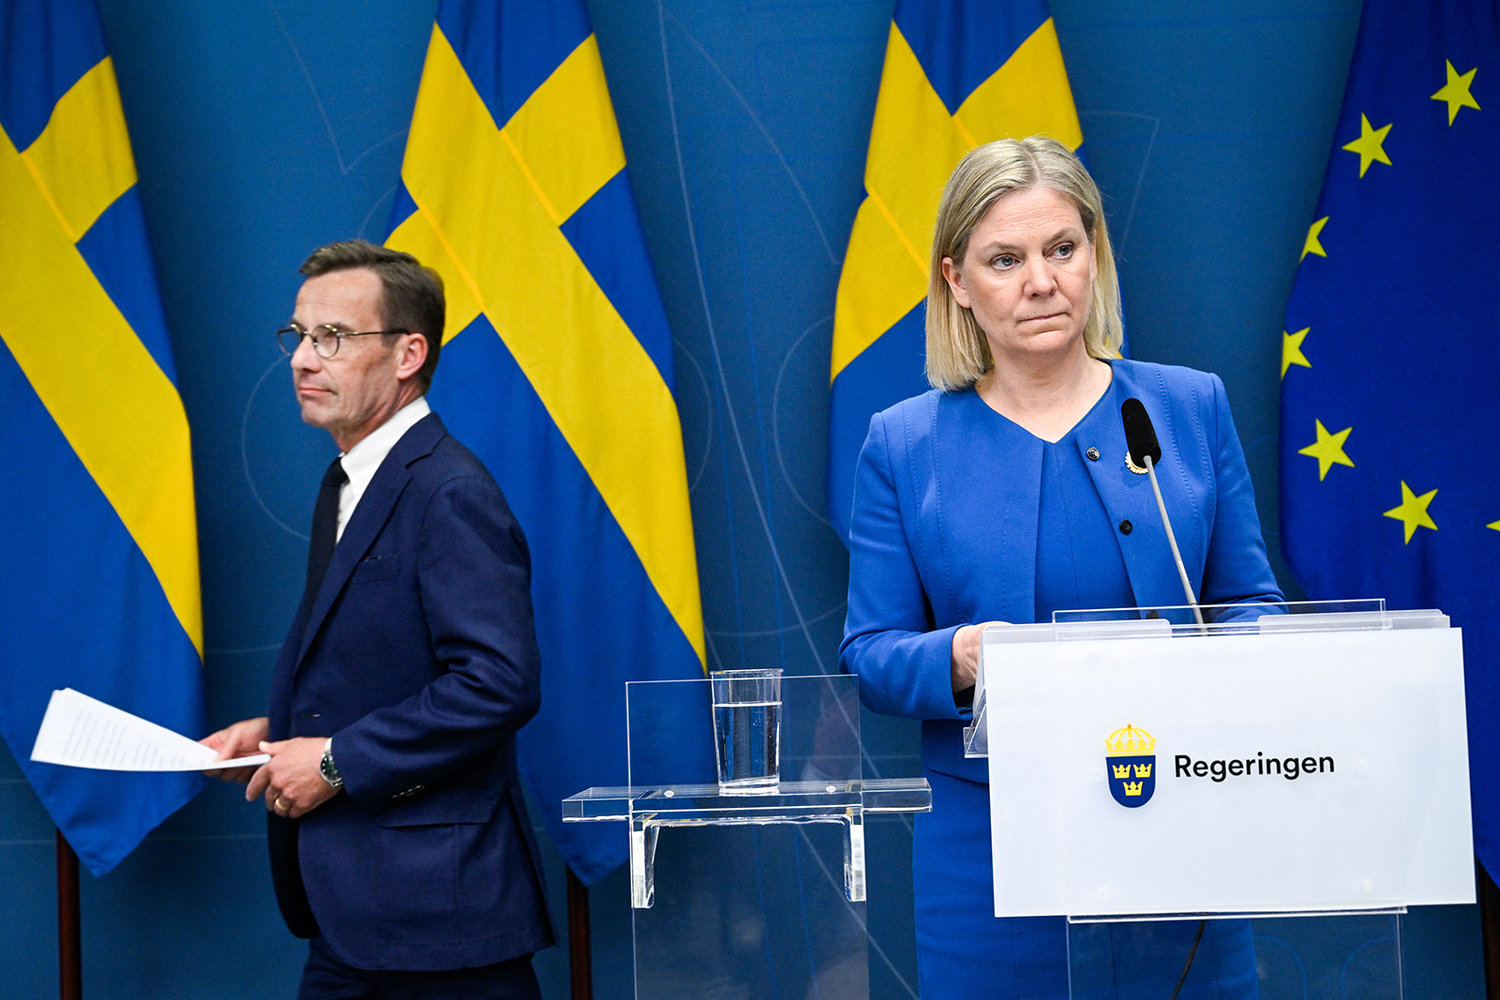 Sweden's Prime Minister Magdalena Andersson (right) and the Moderate Party's leader Ulf Kristersson arrive to address a news conference in Stockholm, Sweden, on May 16, 2022. - Sweden will apply for membership in NATO as a deterrent against Russian aggression, Swedish Prime Minister Magdalena Andersson said in a historic reversal of the country's decades-long military non-alignment. (Henrik Montgomery/TT News Agency/AFP via Getty Images/TNS)